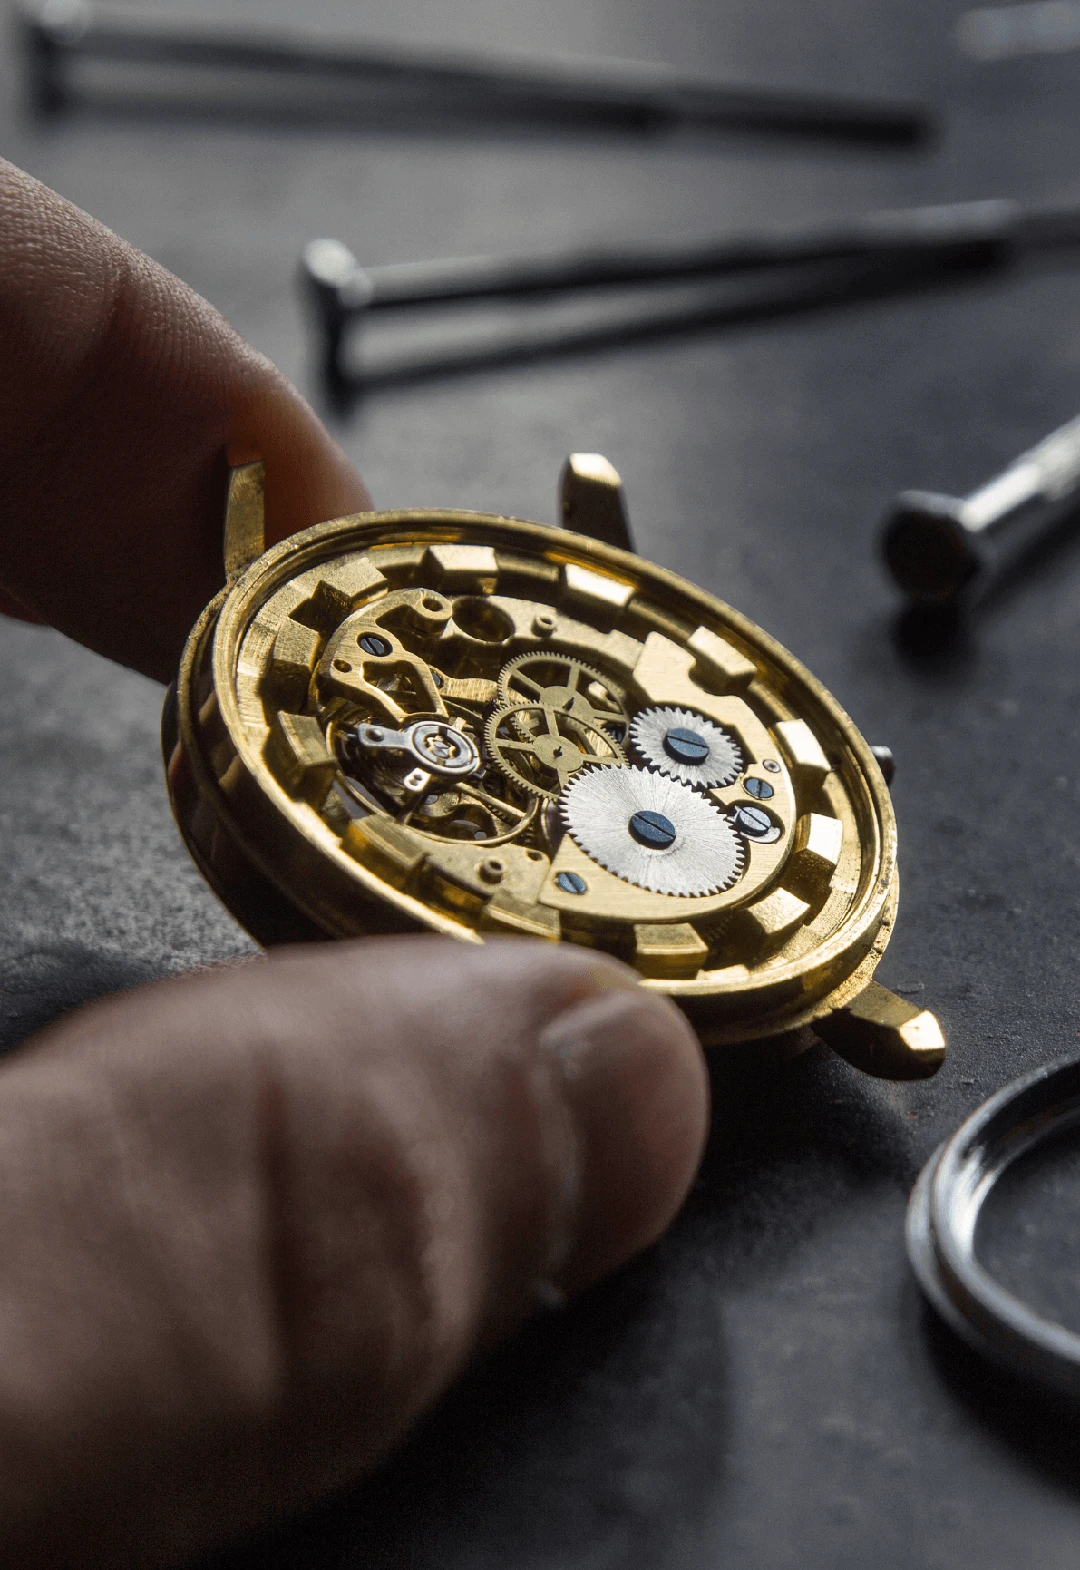 Timeless Elegance: A Journey Through the World of Watches